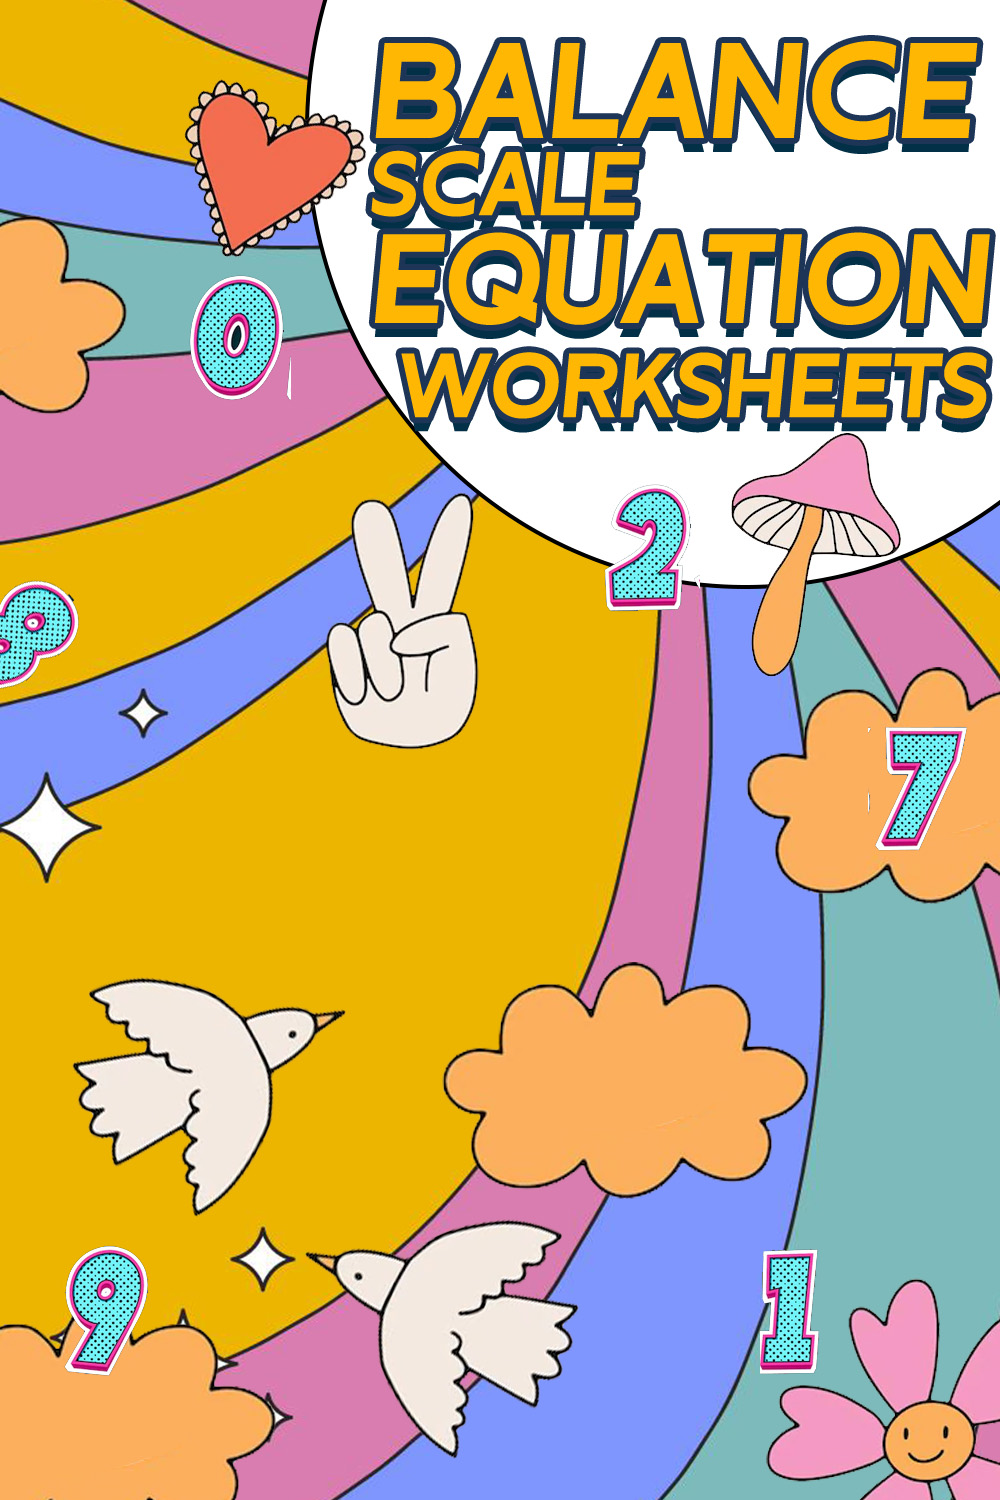 Balance Scale Equations Worksheets